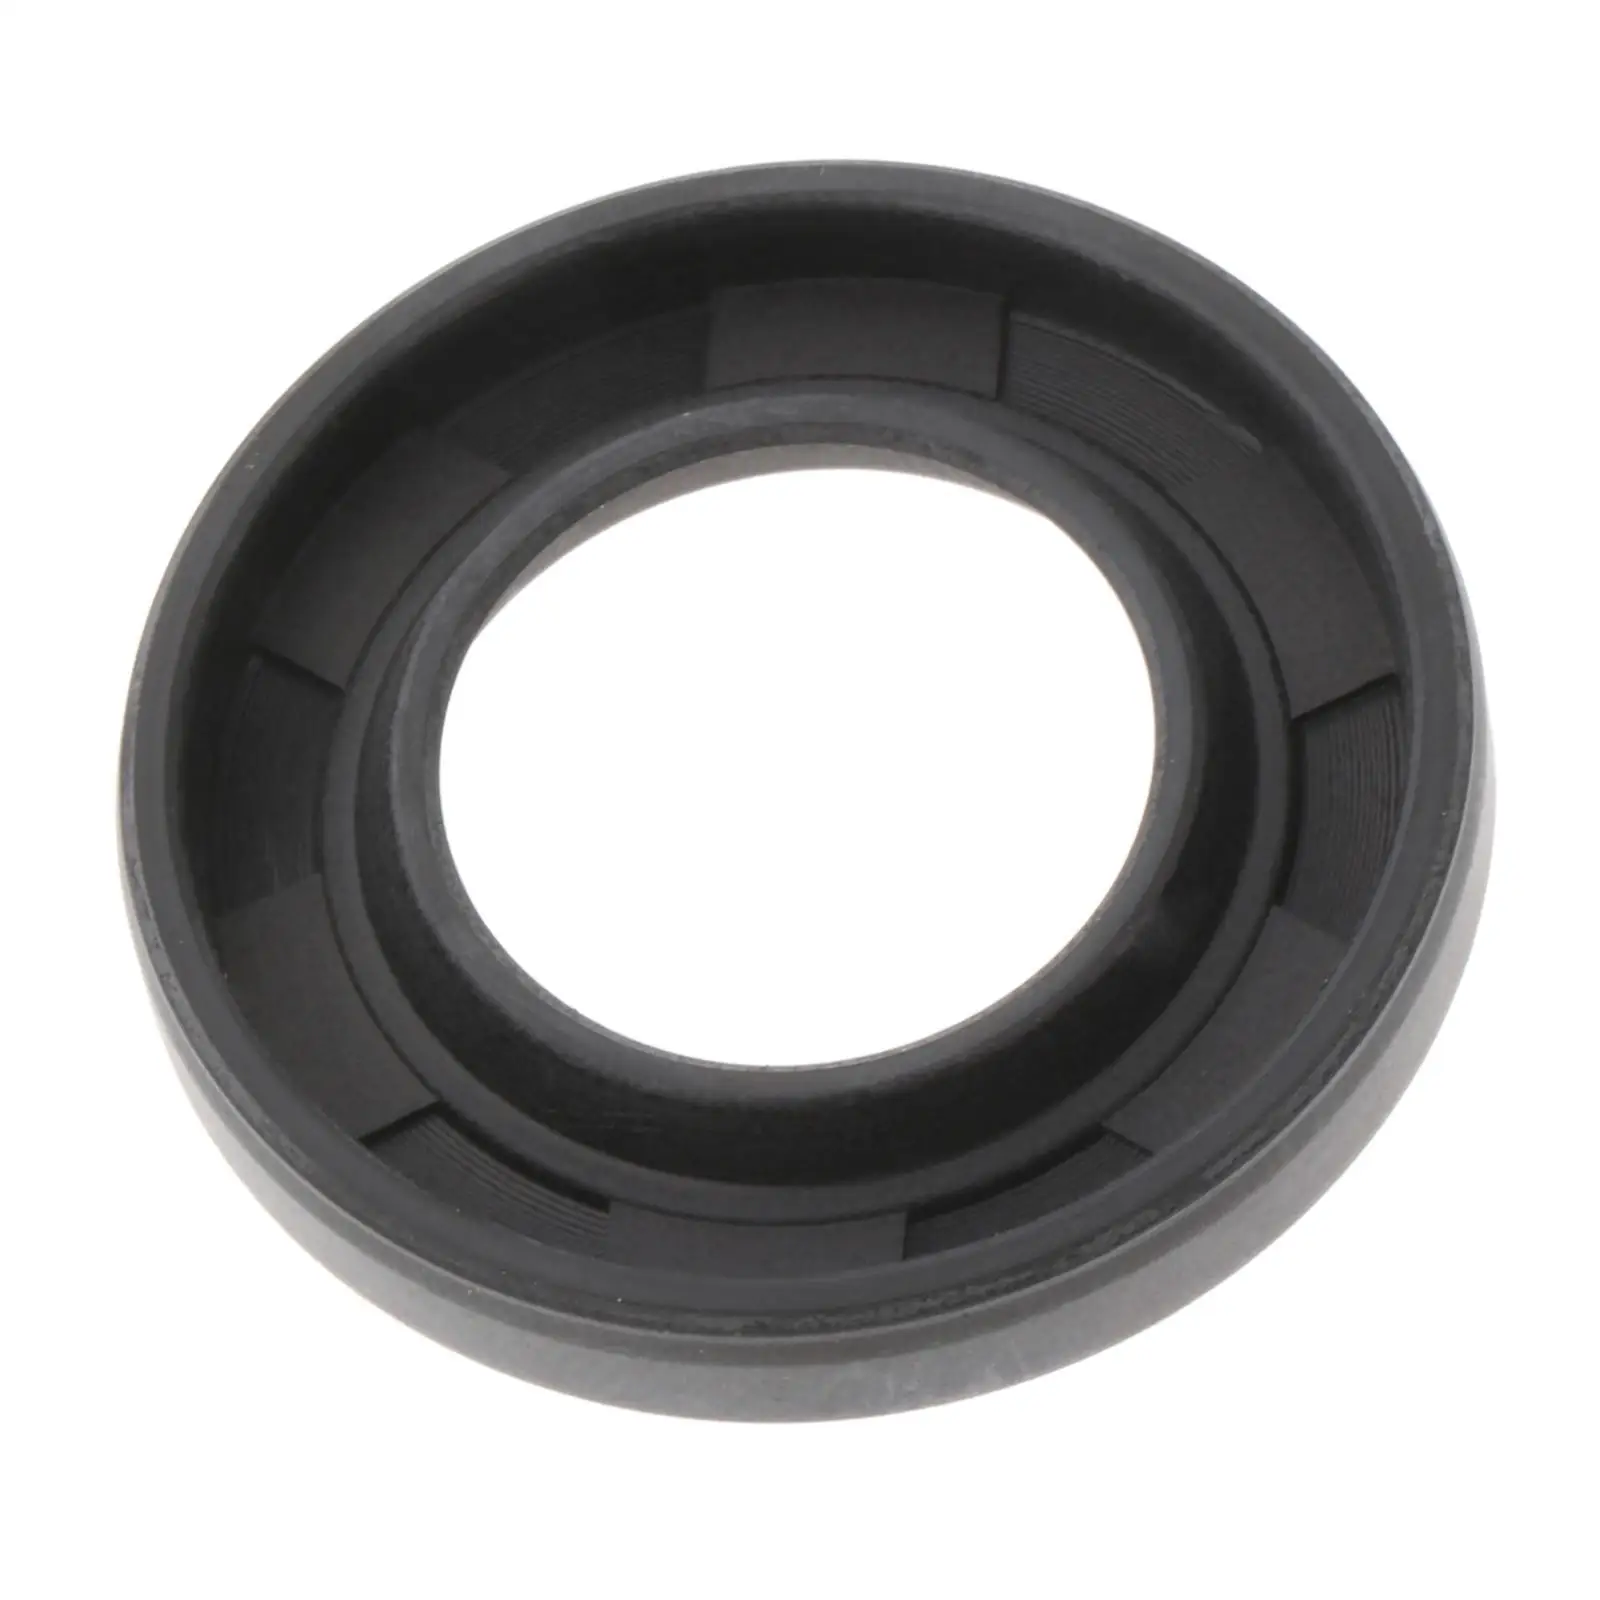 Oil Seal Direct Replaces 93106-18M01 Fits for Yamaha Outboard Motor 60HP 70HP 2 Stroke